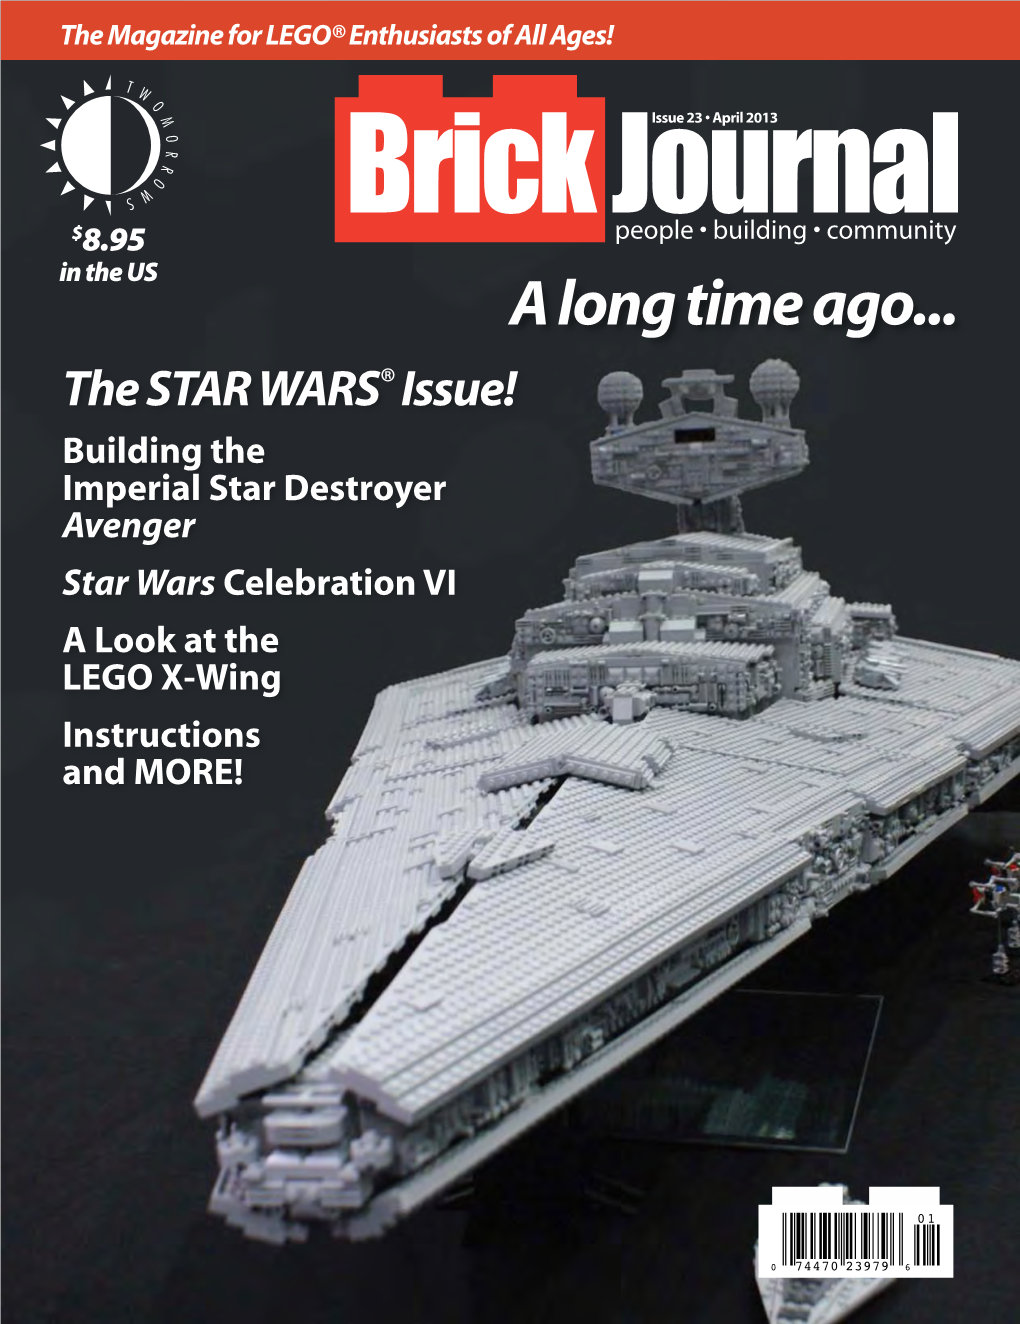 A Long Time Ago... the STAR WARS® Issue! Building the Imperial Star Destroyer Avenger Star Wars Celebration VI a Look at the LEGO X-Wing Instructions and MORE!